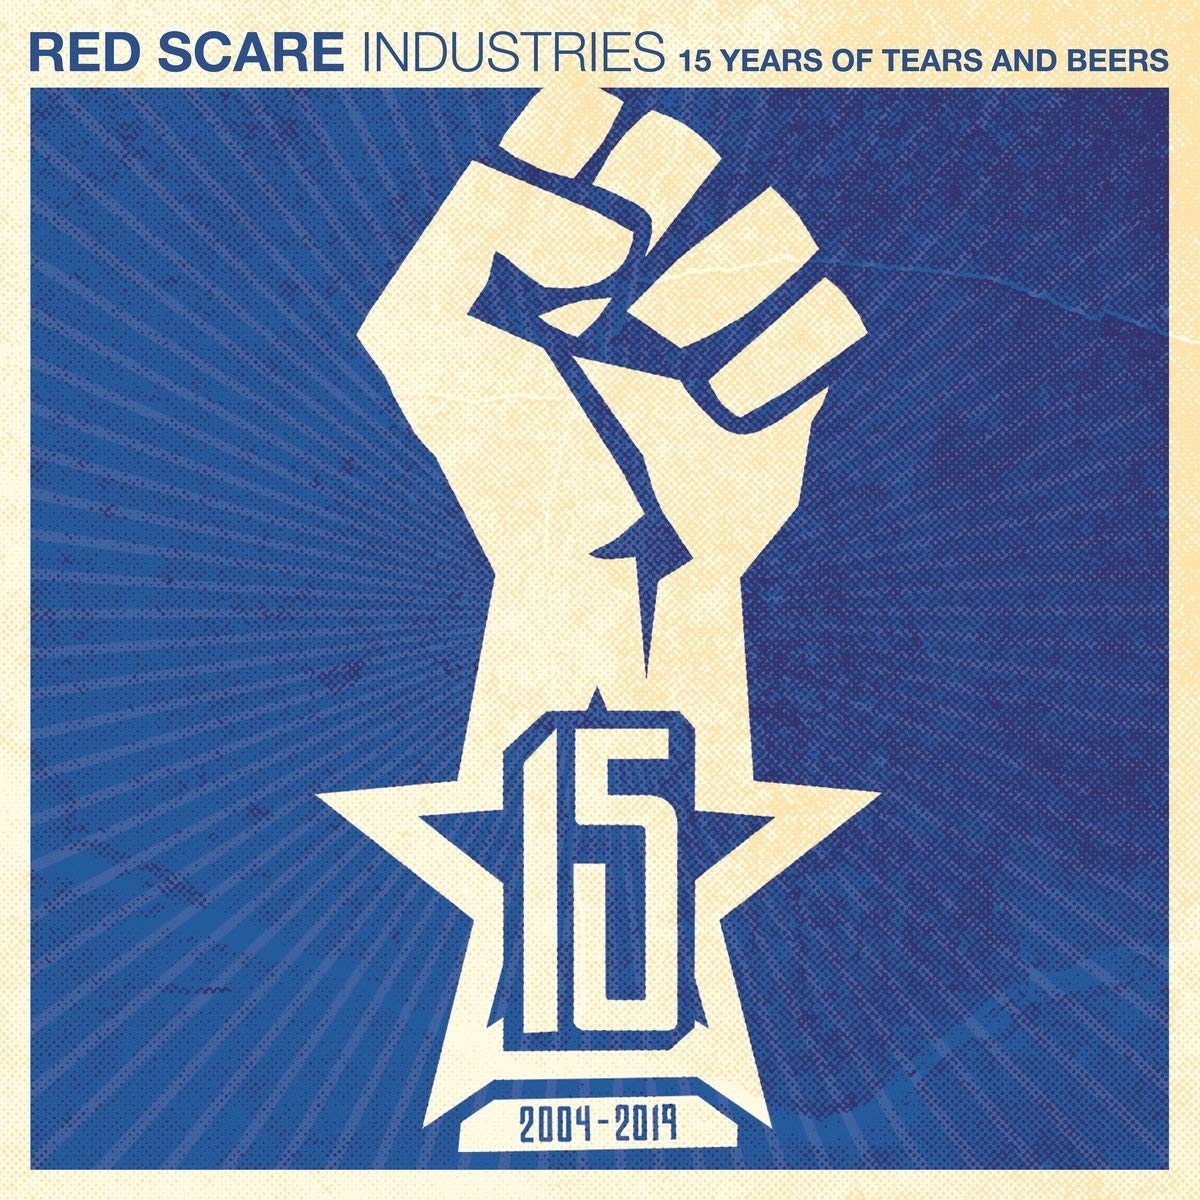 Red scare. Red Scare industries. Red Scare discogs. Tears for Beers listen.